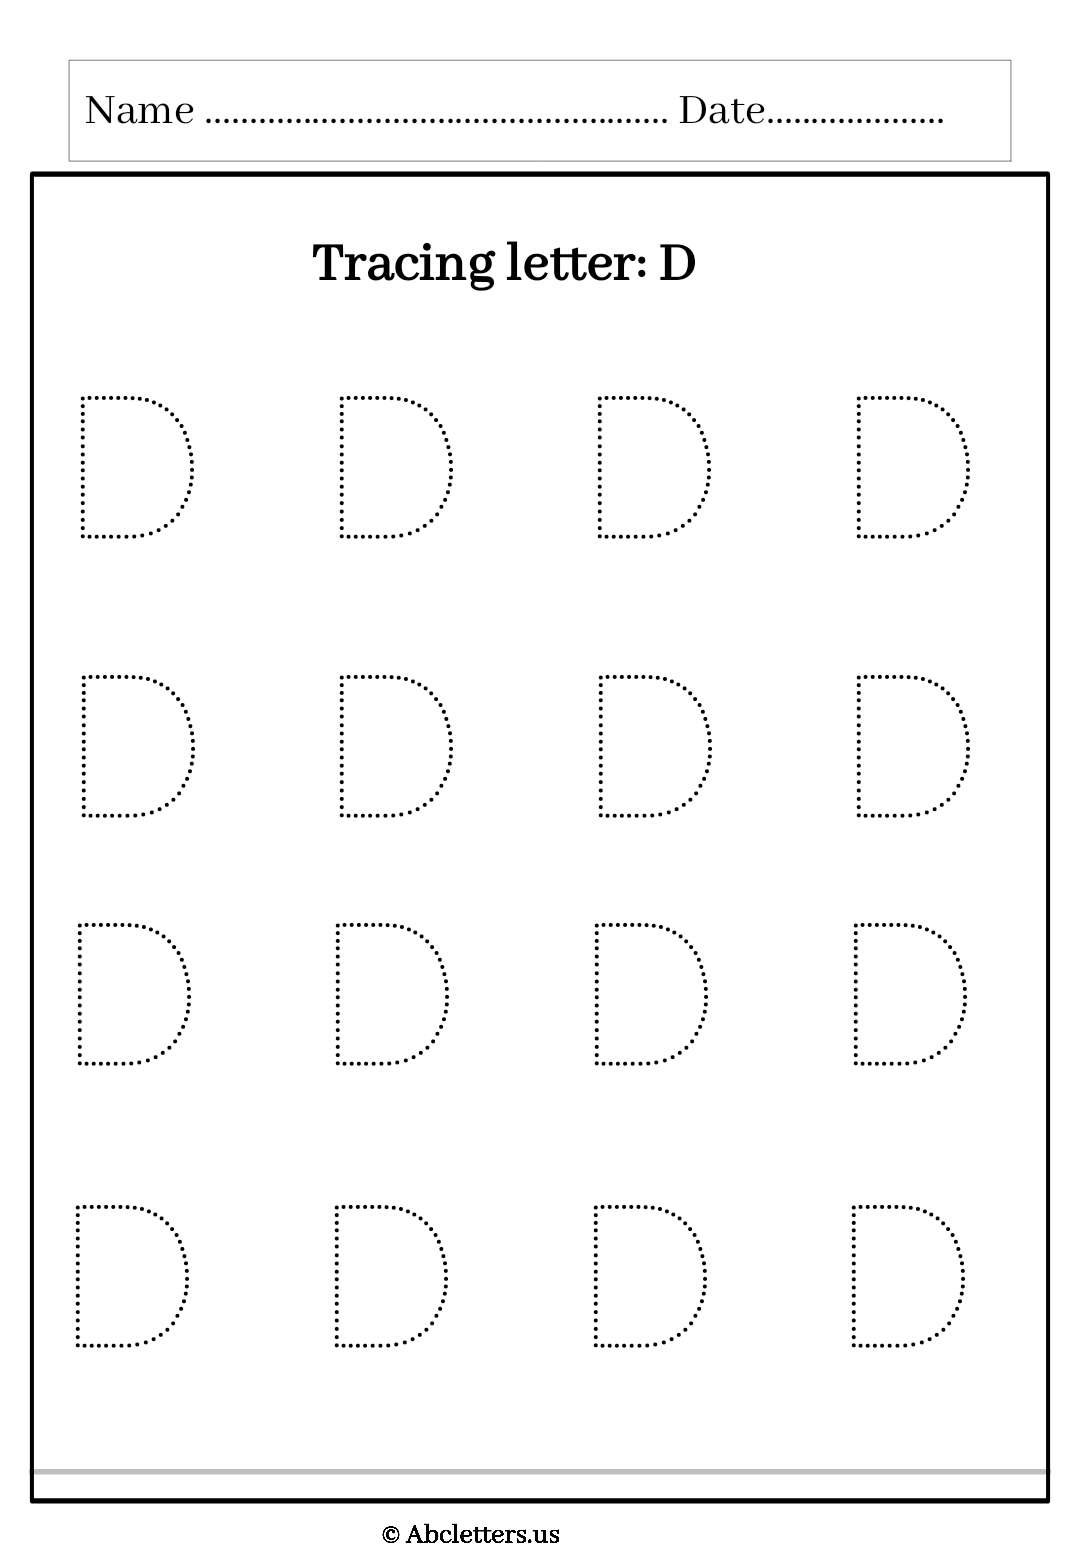 Tracing letter uppercase D